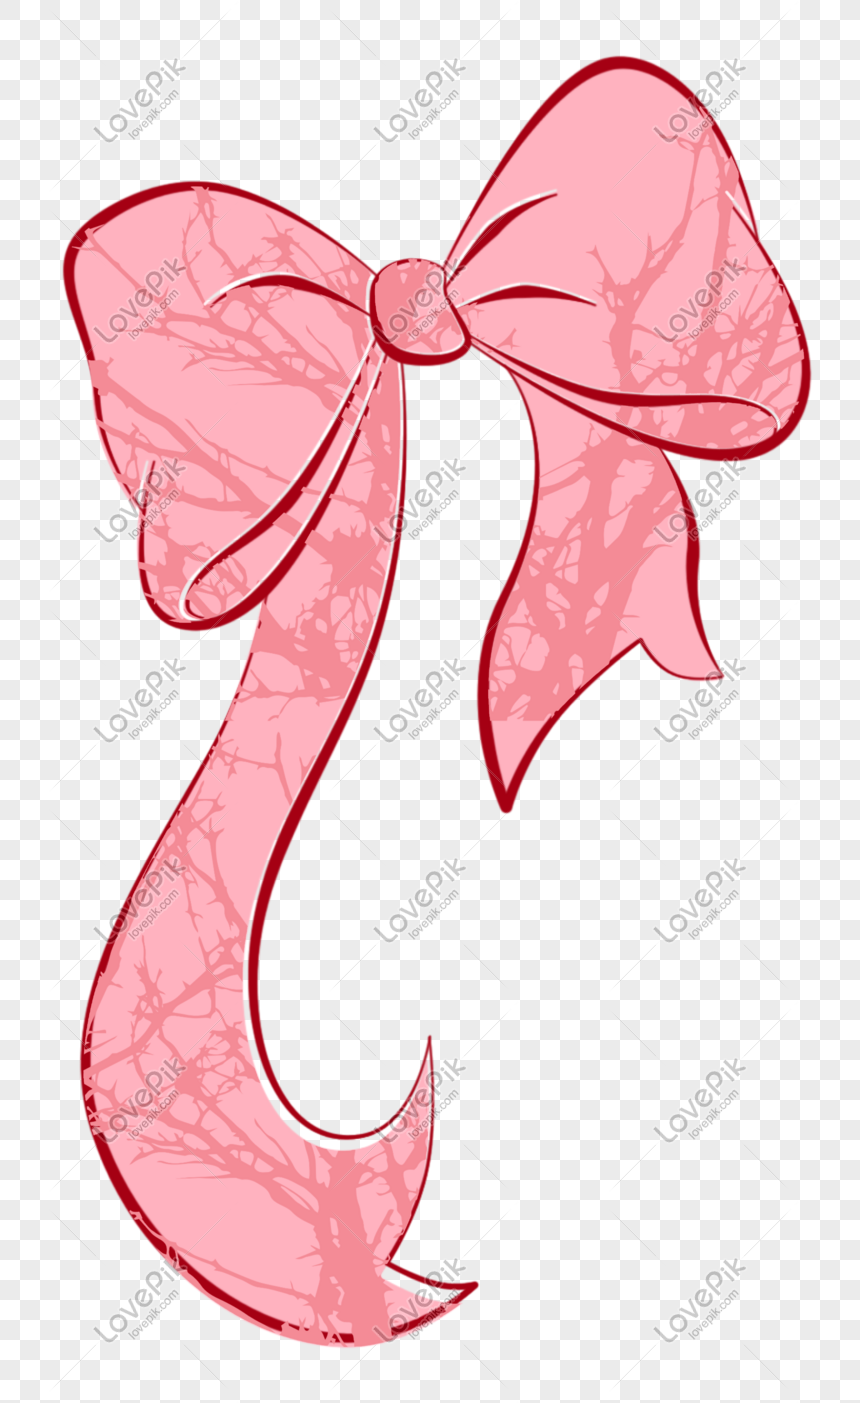 Download Pink Bow Ribbon Decoration Png Image Picture Free Download 611770231 Lovepik Com